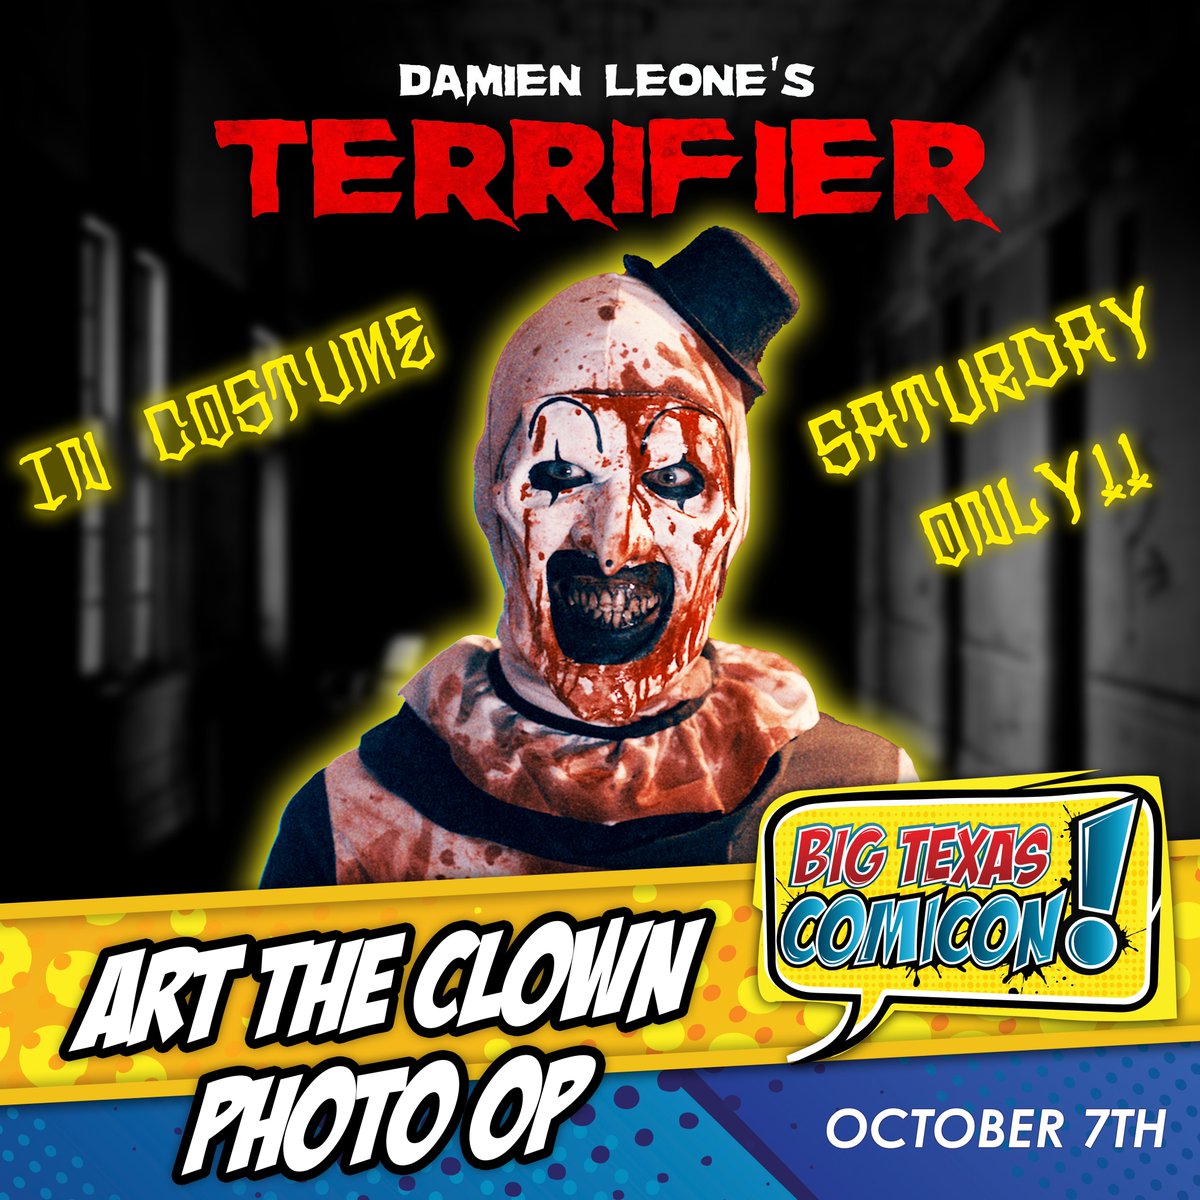 Art The Clown photo ops are available NOW! 

tinyurl.com/bigtexascomico…

David Howard Thornton in full Terrifier makeup with creator/director Damien Leone Saturday October 7th!